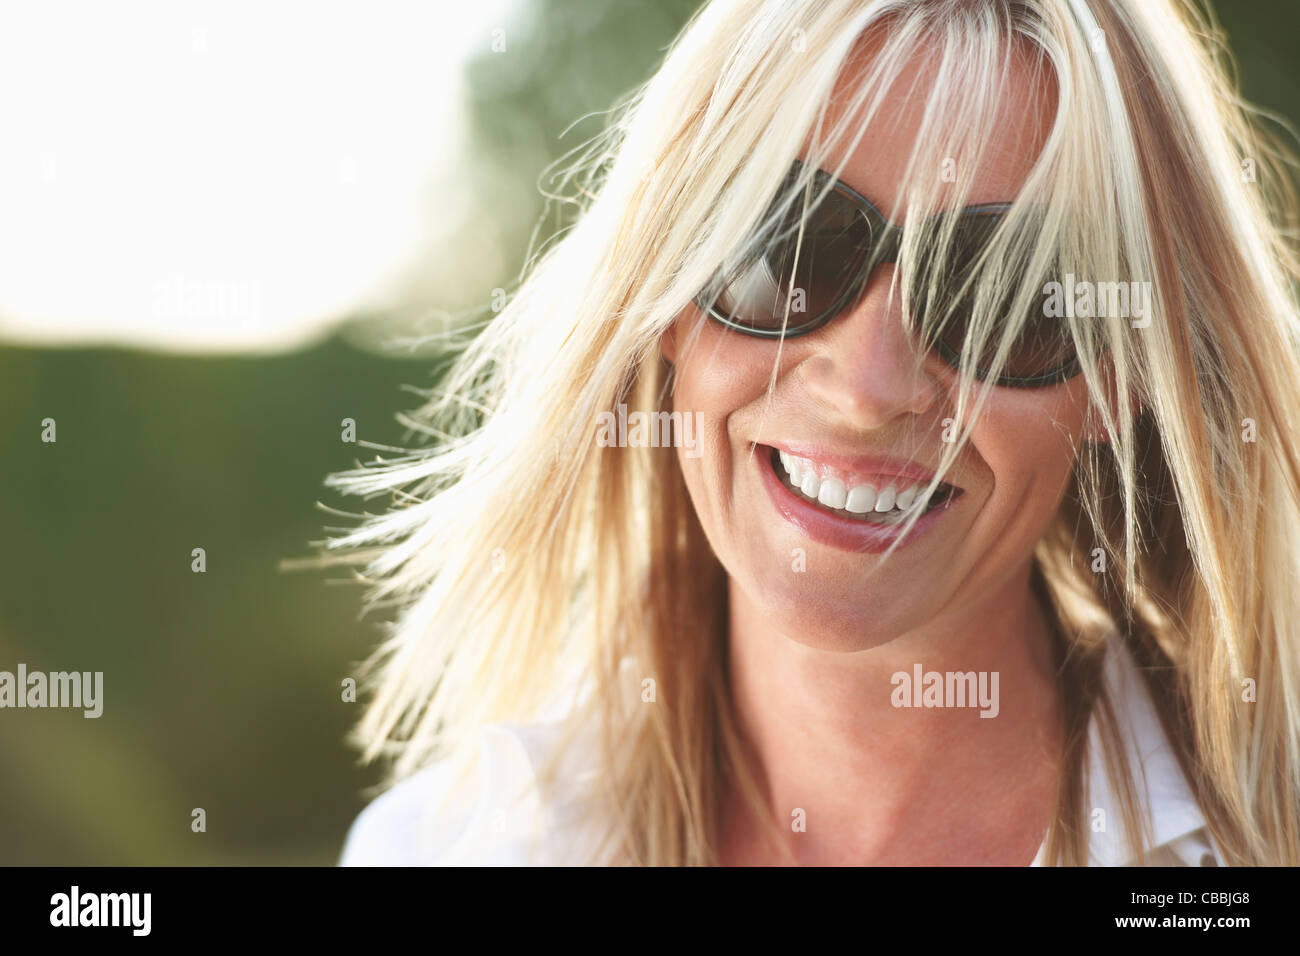 Smiling woman wearing sunglasses Banque D'Images